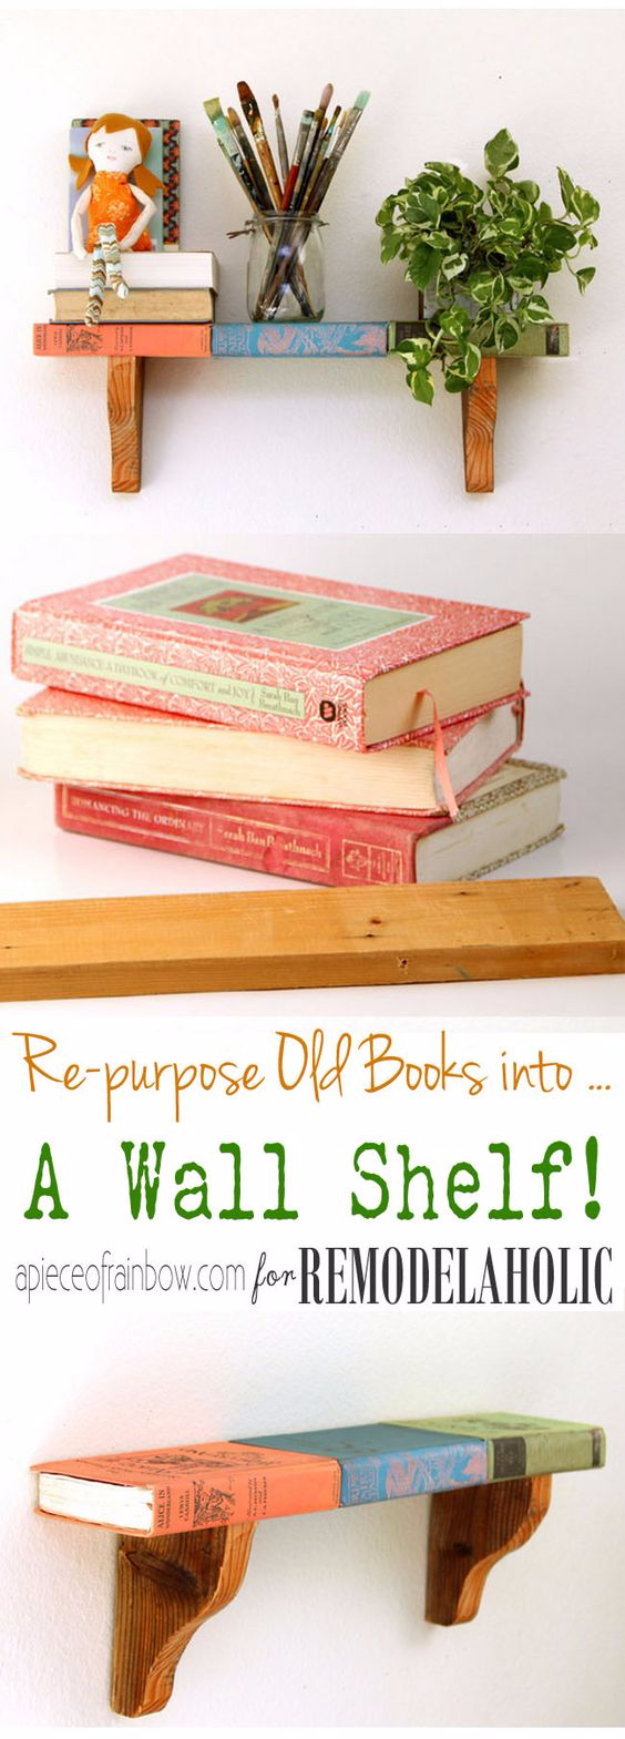 15 Incredible DIY Projects You Can Make Using Old Books